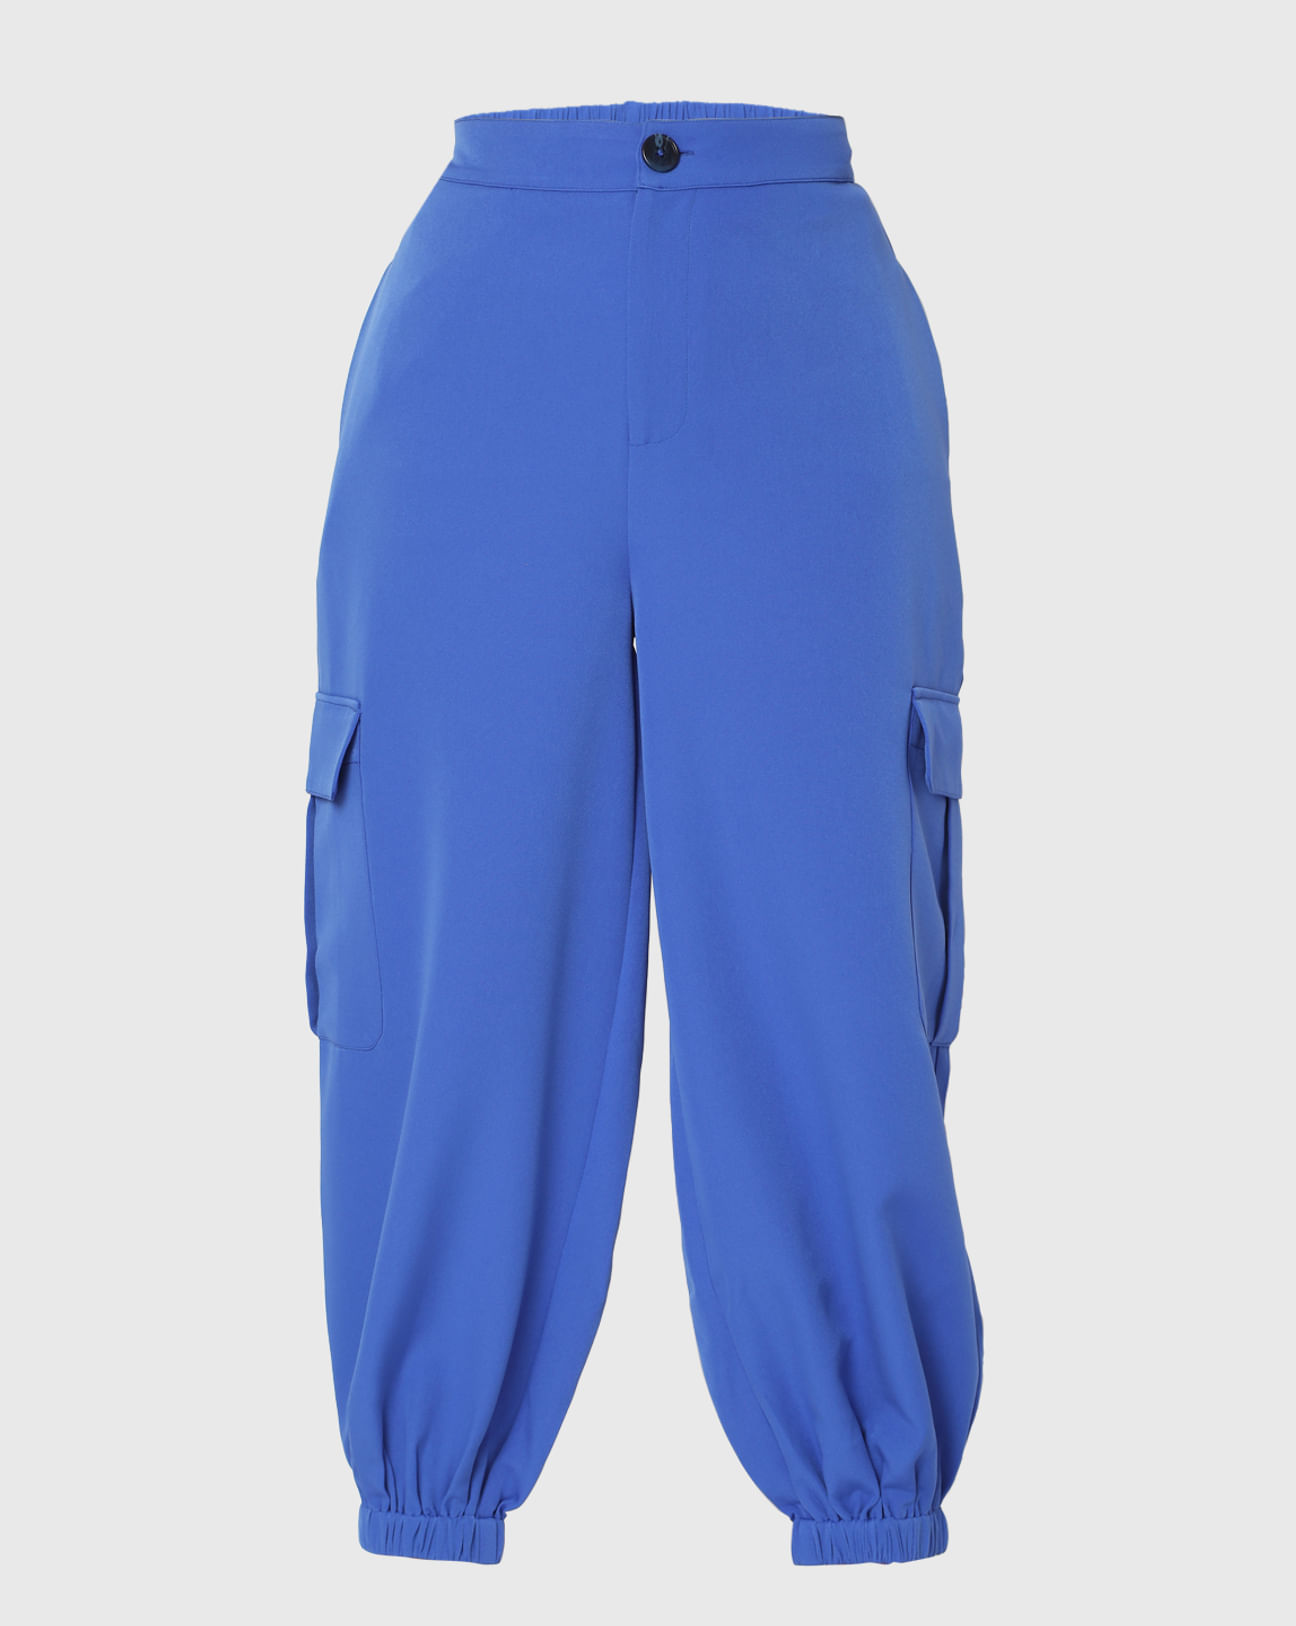 Buy Blue High Rise Jogger Pants For Women Online in India